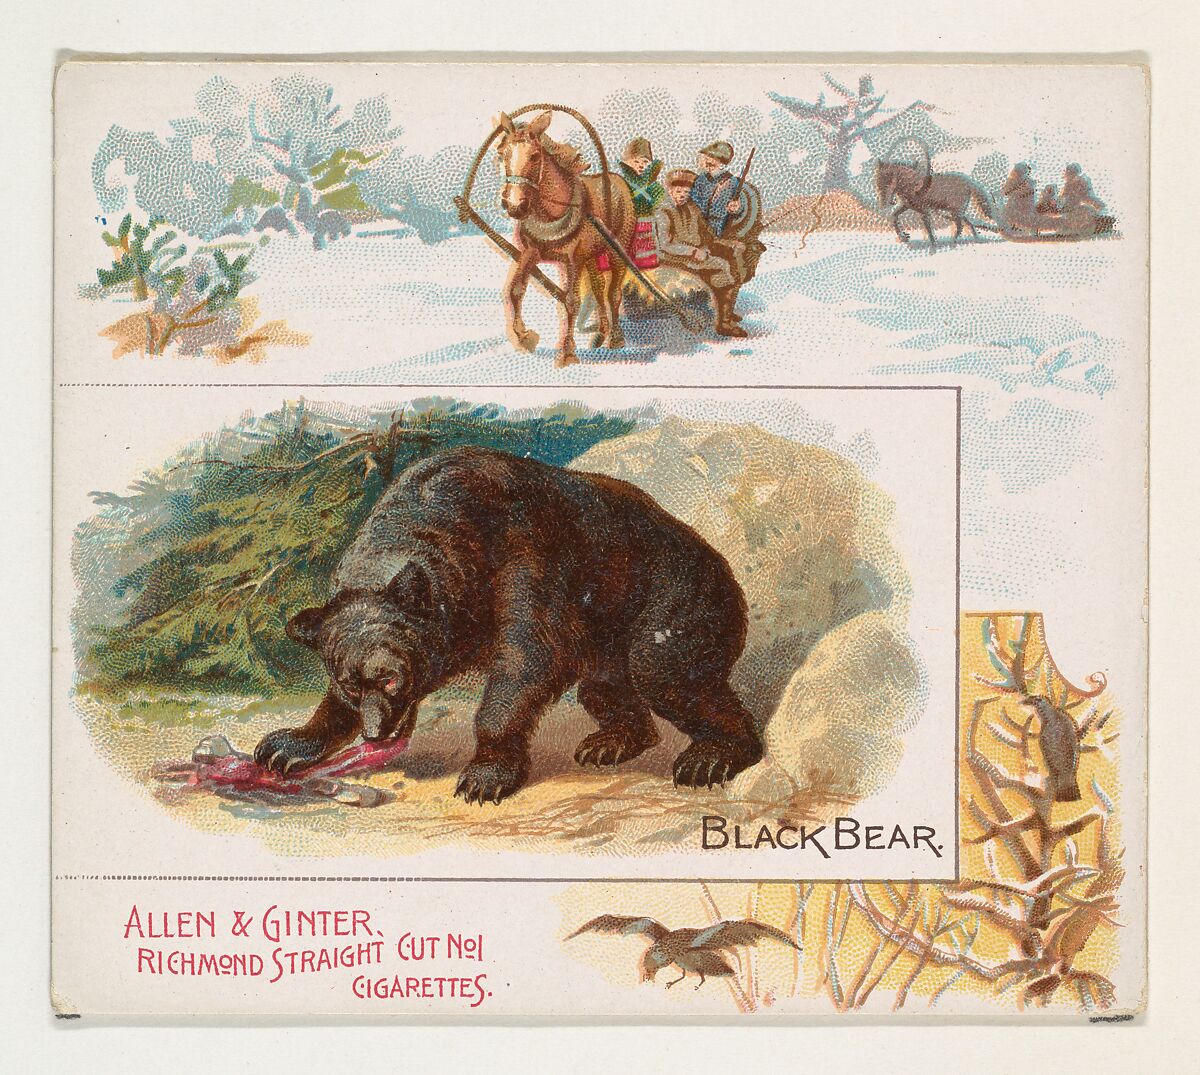 Black Bear, from Quadrupeds series (N41) for Allen & Ginter Cigarettes, Issued by Allen &amp; Ginter (American, Richmond, Virginia), Commercial color lithograph 